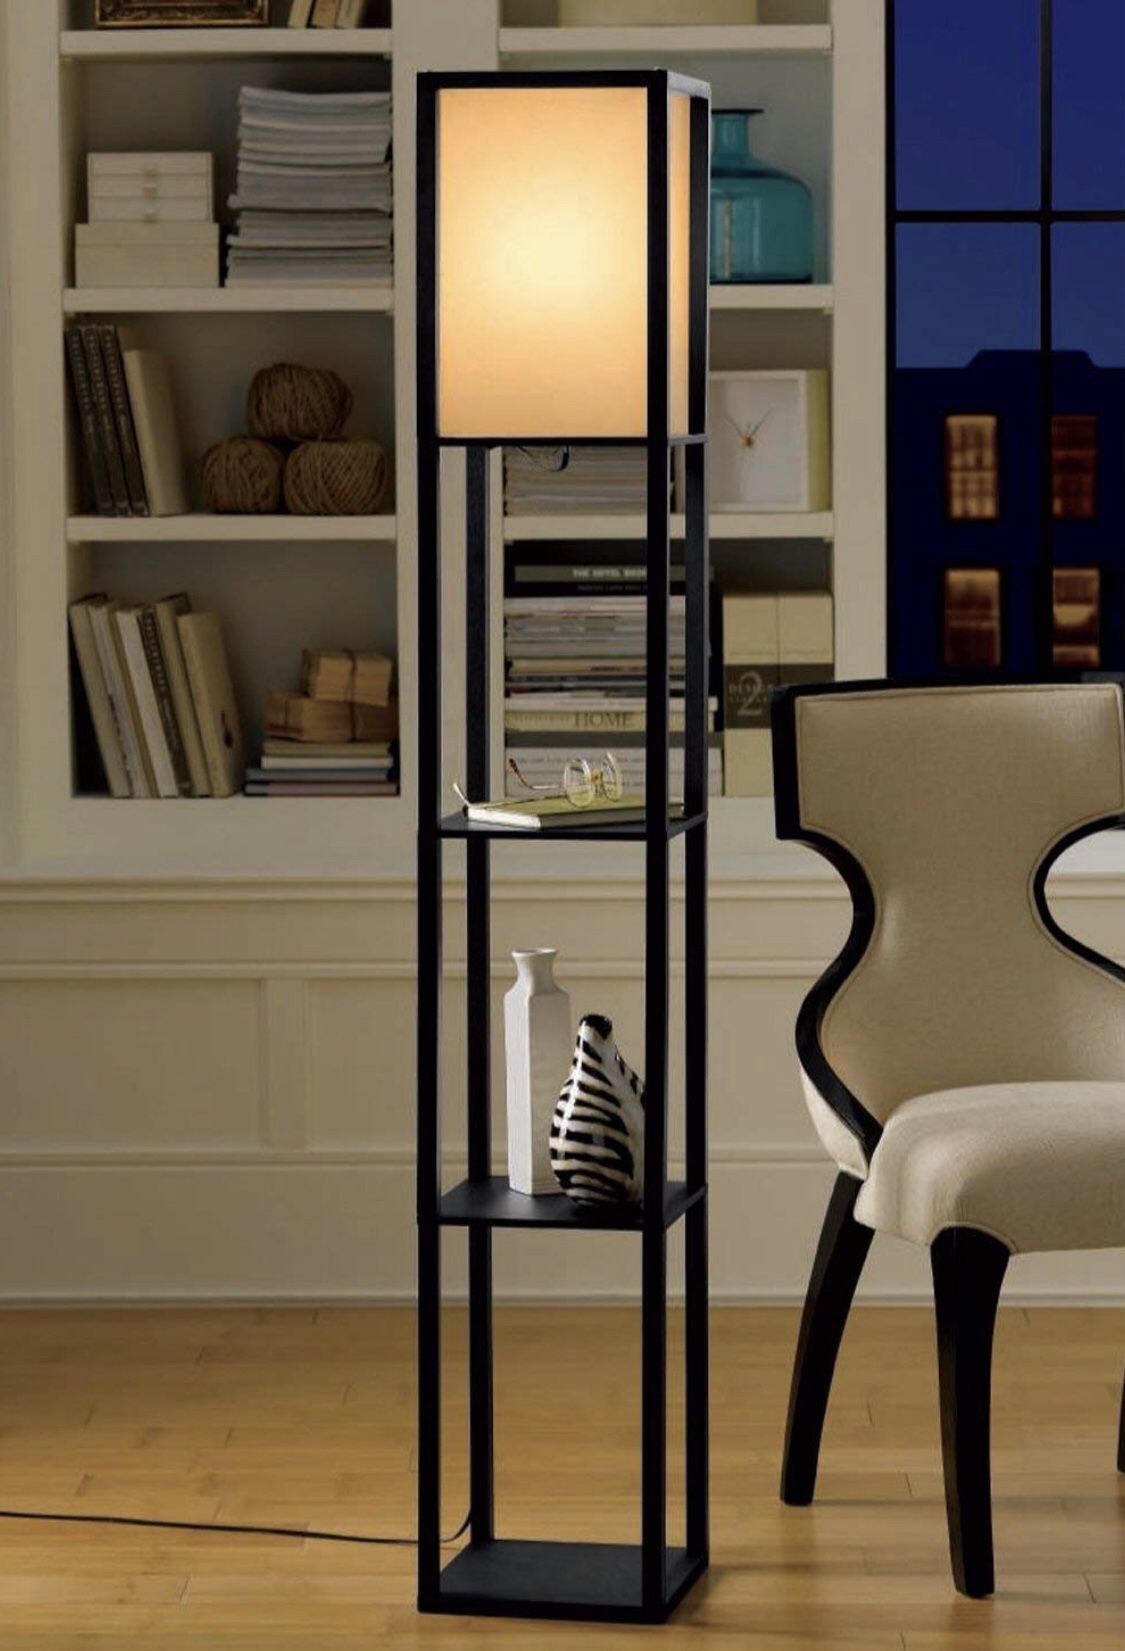 Floor Lamp with Shelving - Made of Wood - Linen Shade and Pull Chain Light - NEW IN BOX - Shippable 📦